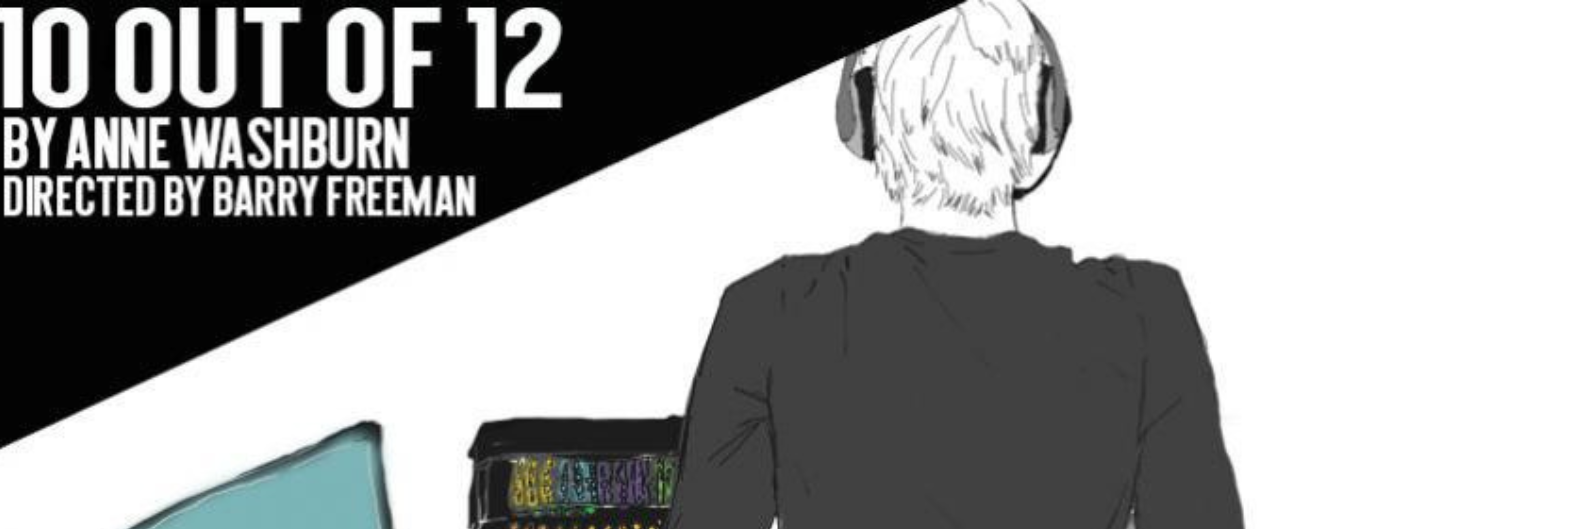 10 out 12 banner